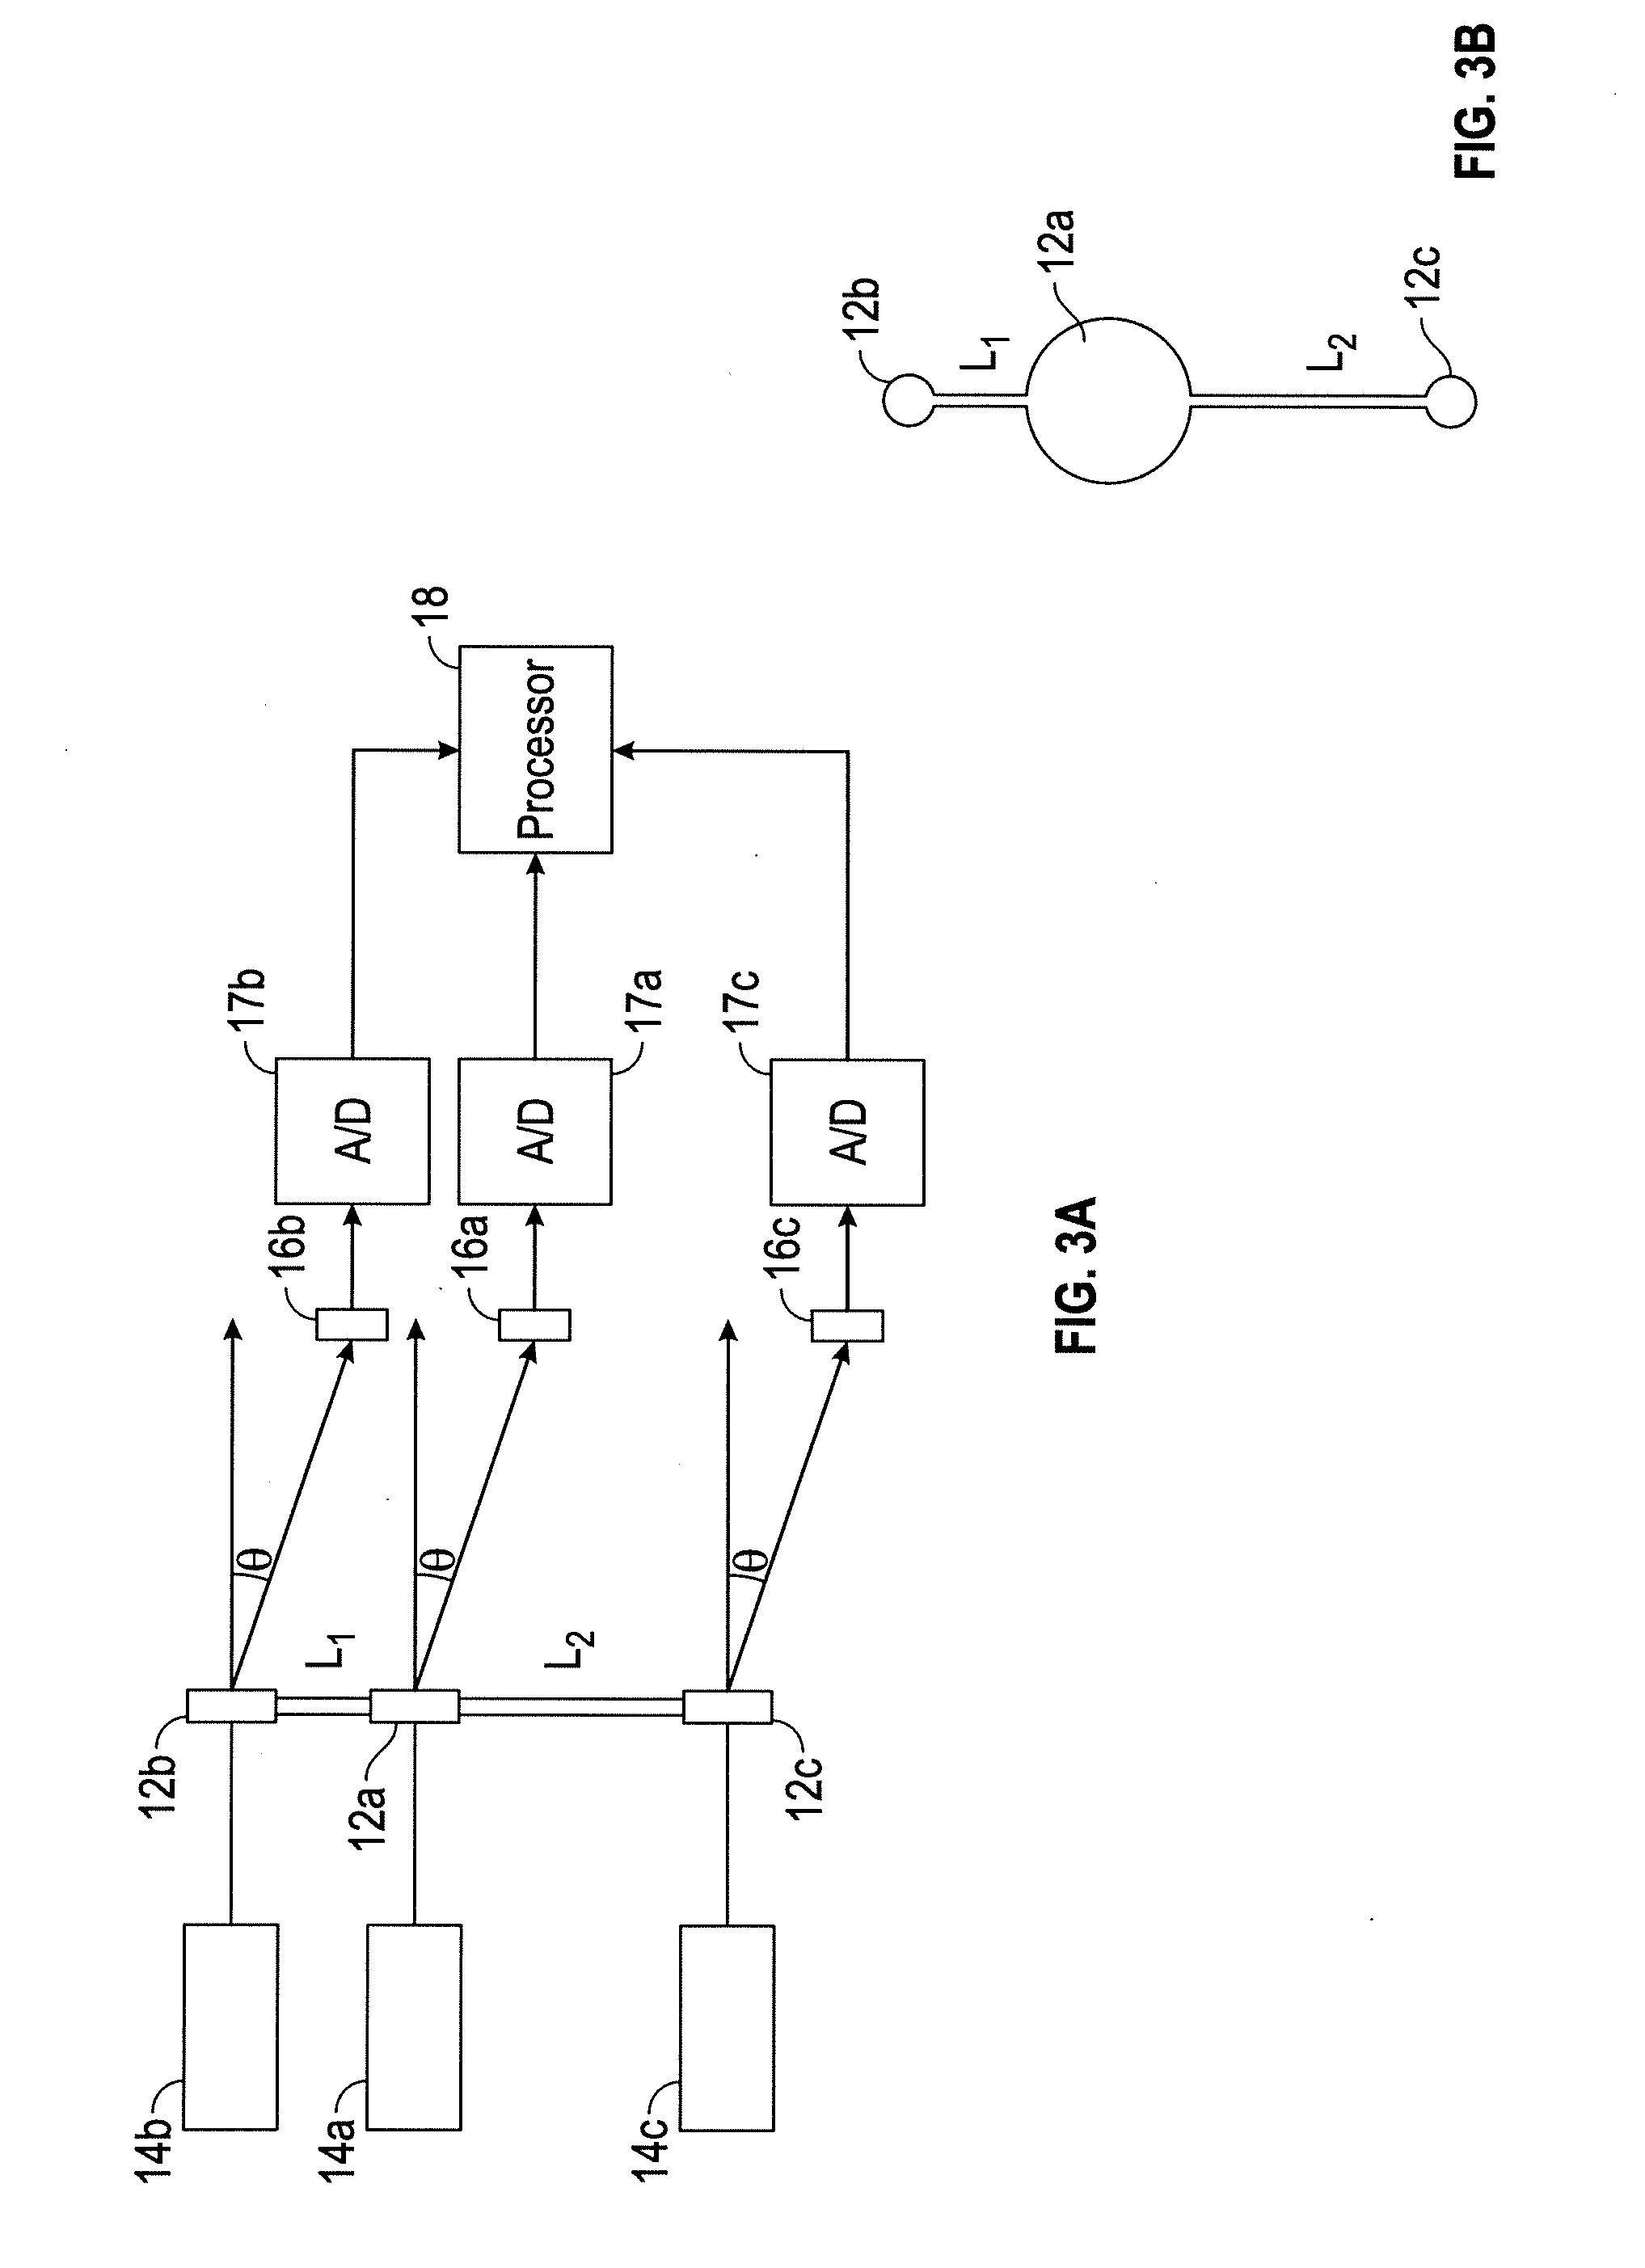 Light scattering sperm assesment device and method